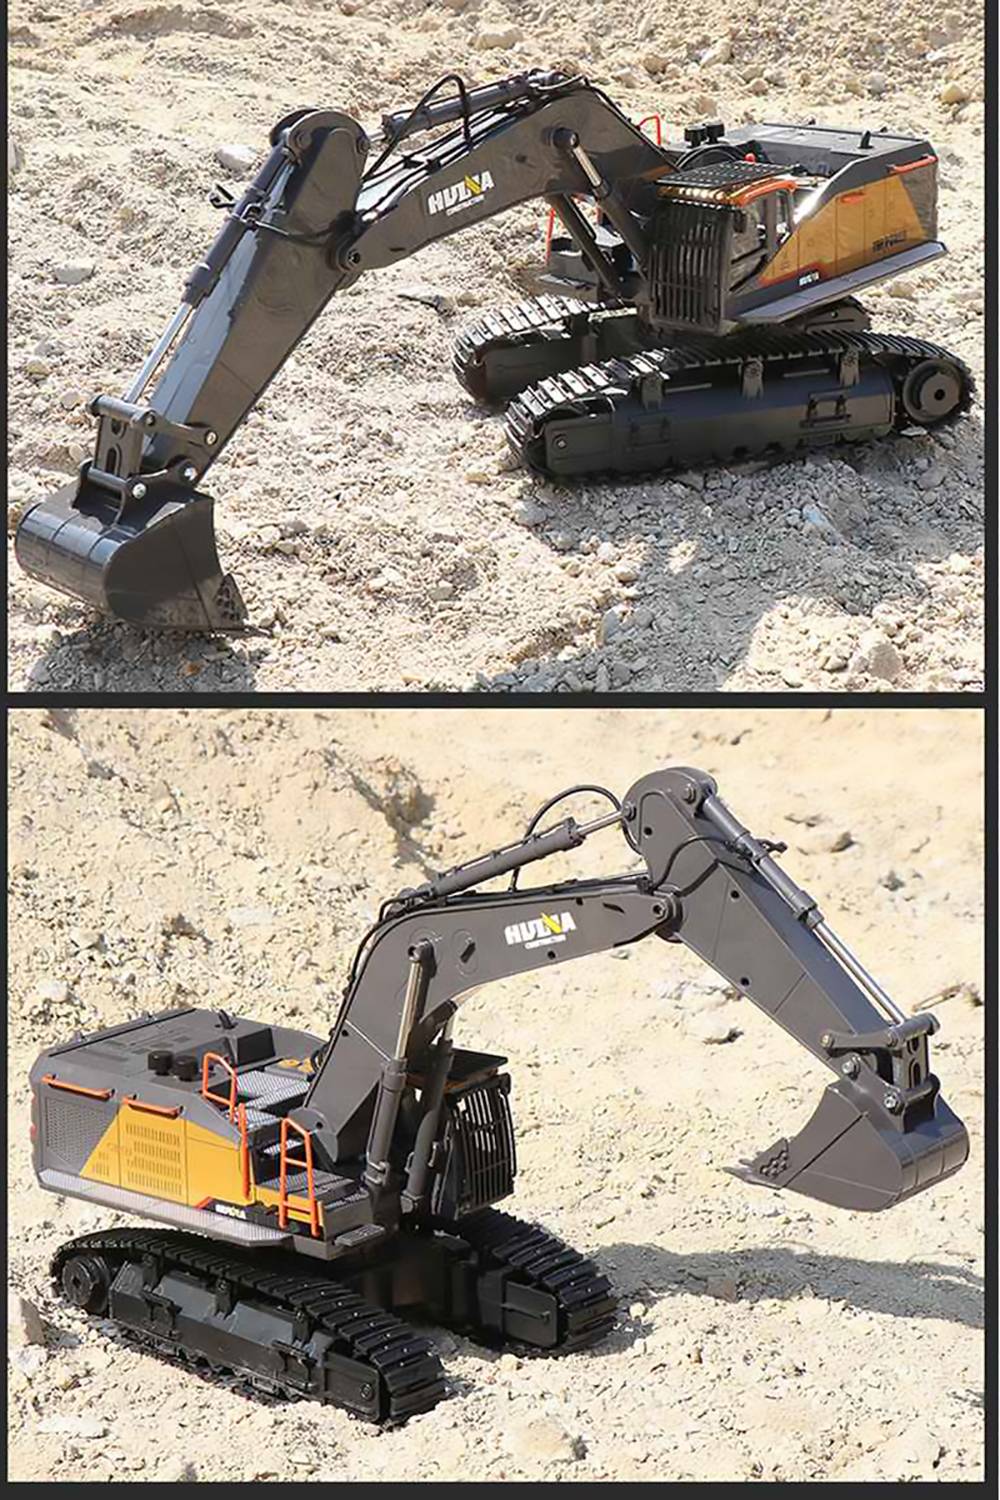 HUINA 1592 Large RC Excavator Simulation Alloy Toy Multi-functional with Remote Control